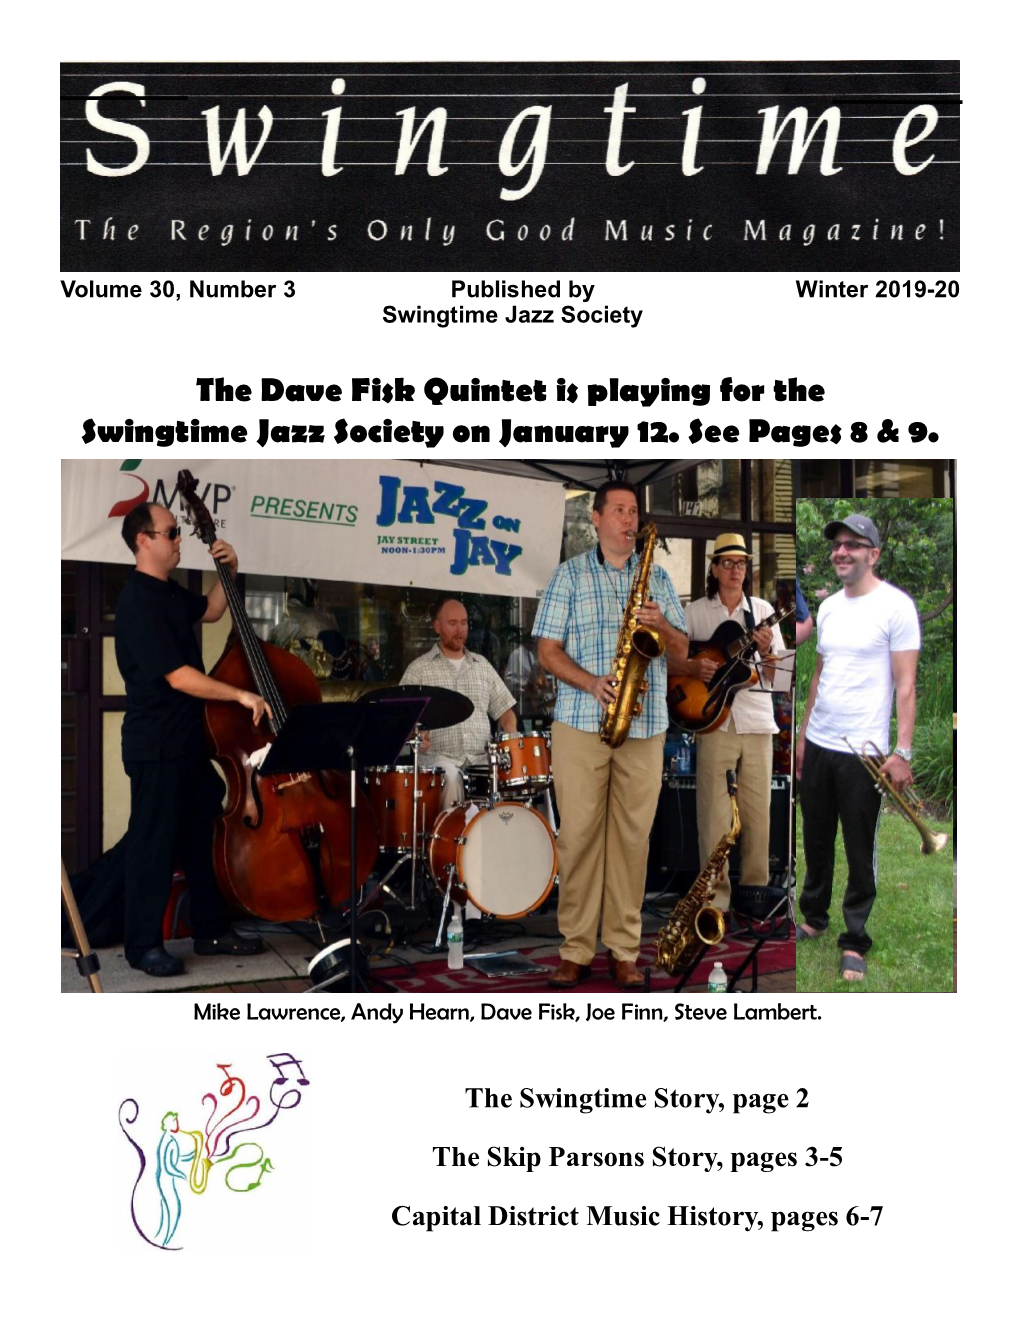 The Dave Fisk Quintet Is Playing for the Swingtime Jazz Society on January 12. See Pages 8 & 9